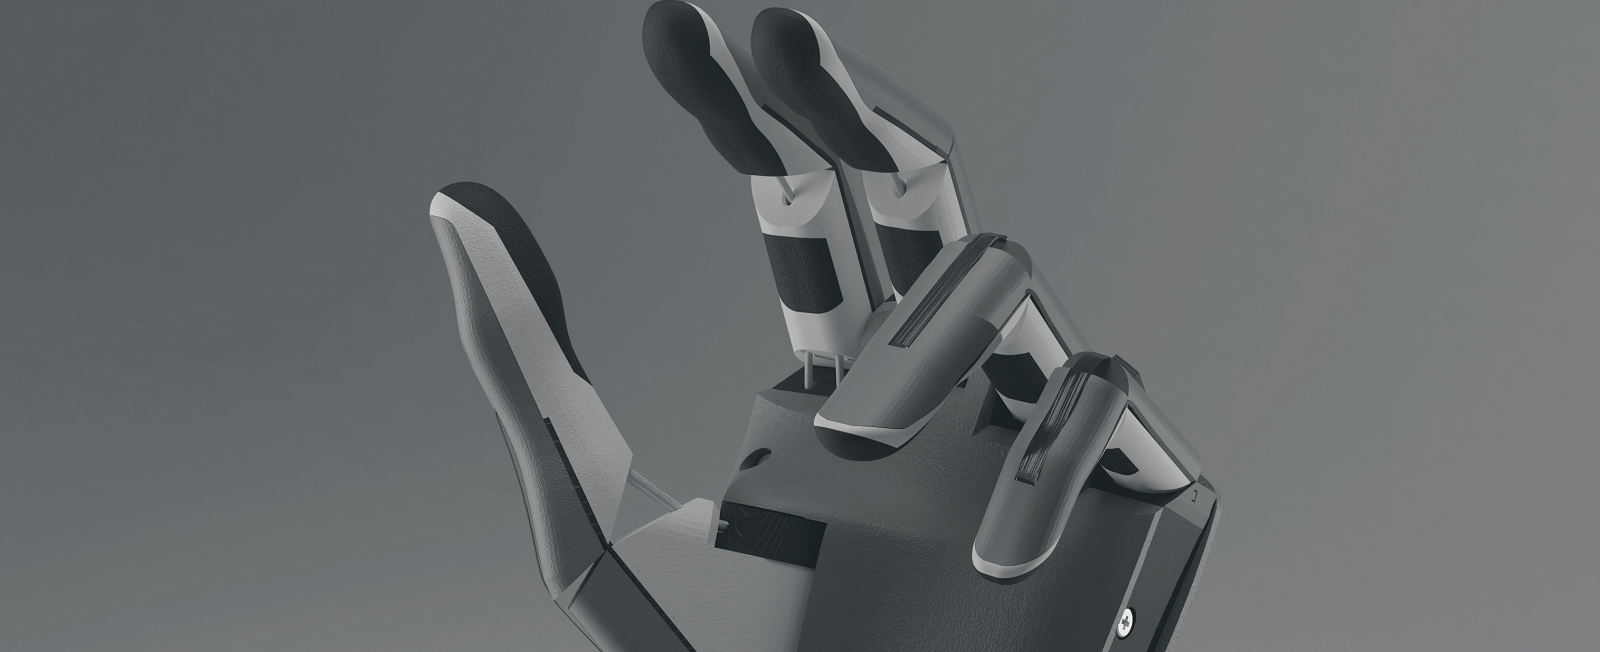 Prosthetic hand design by Metacarpal. Image by Metacarpal